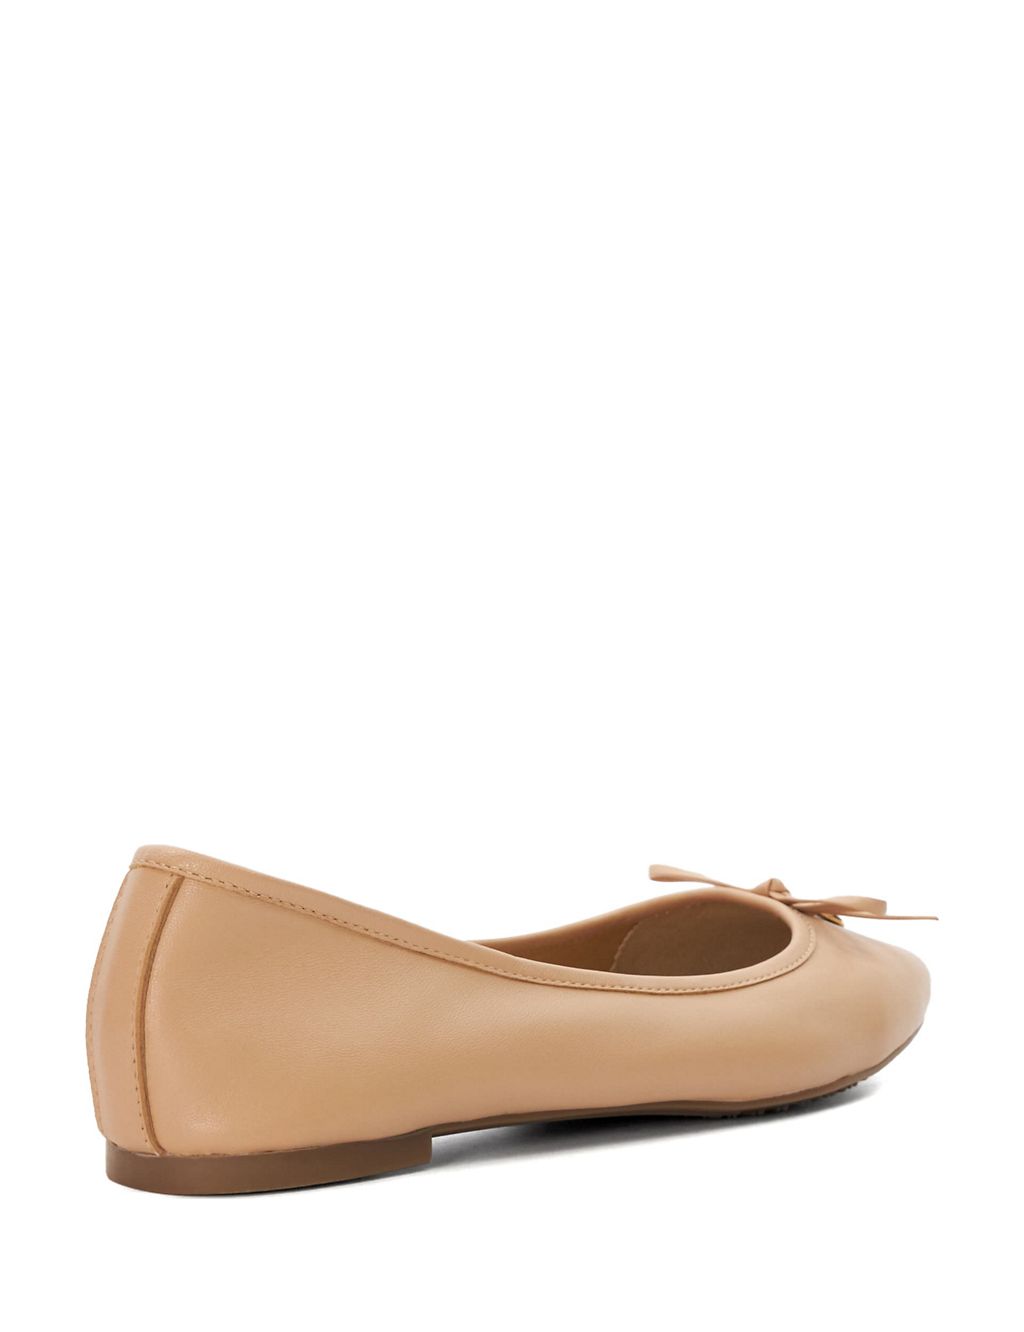 Leather Bow Flat Ballet Pumps 2 of 5